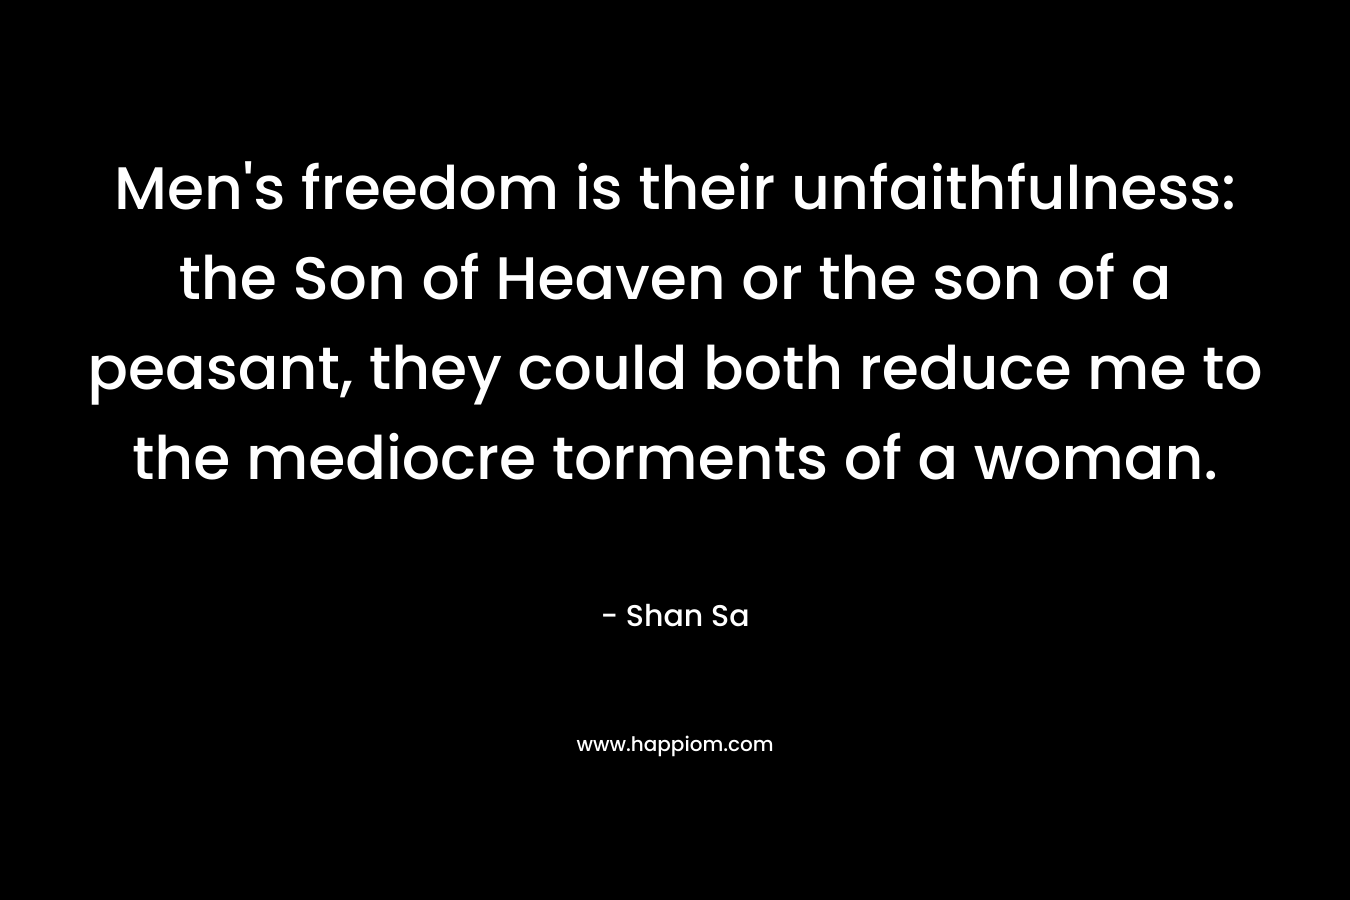 Men’s freedom is their unfaithfulness: the Son of Heaven or the son of a peasant, they could both reduce me to the mediocre torments of a woman. – Shan Sa